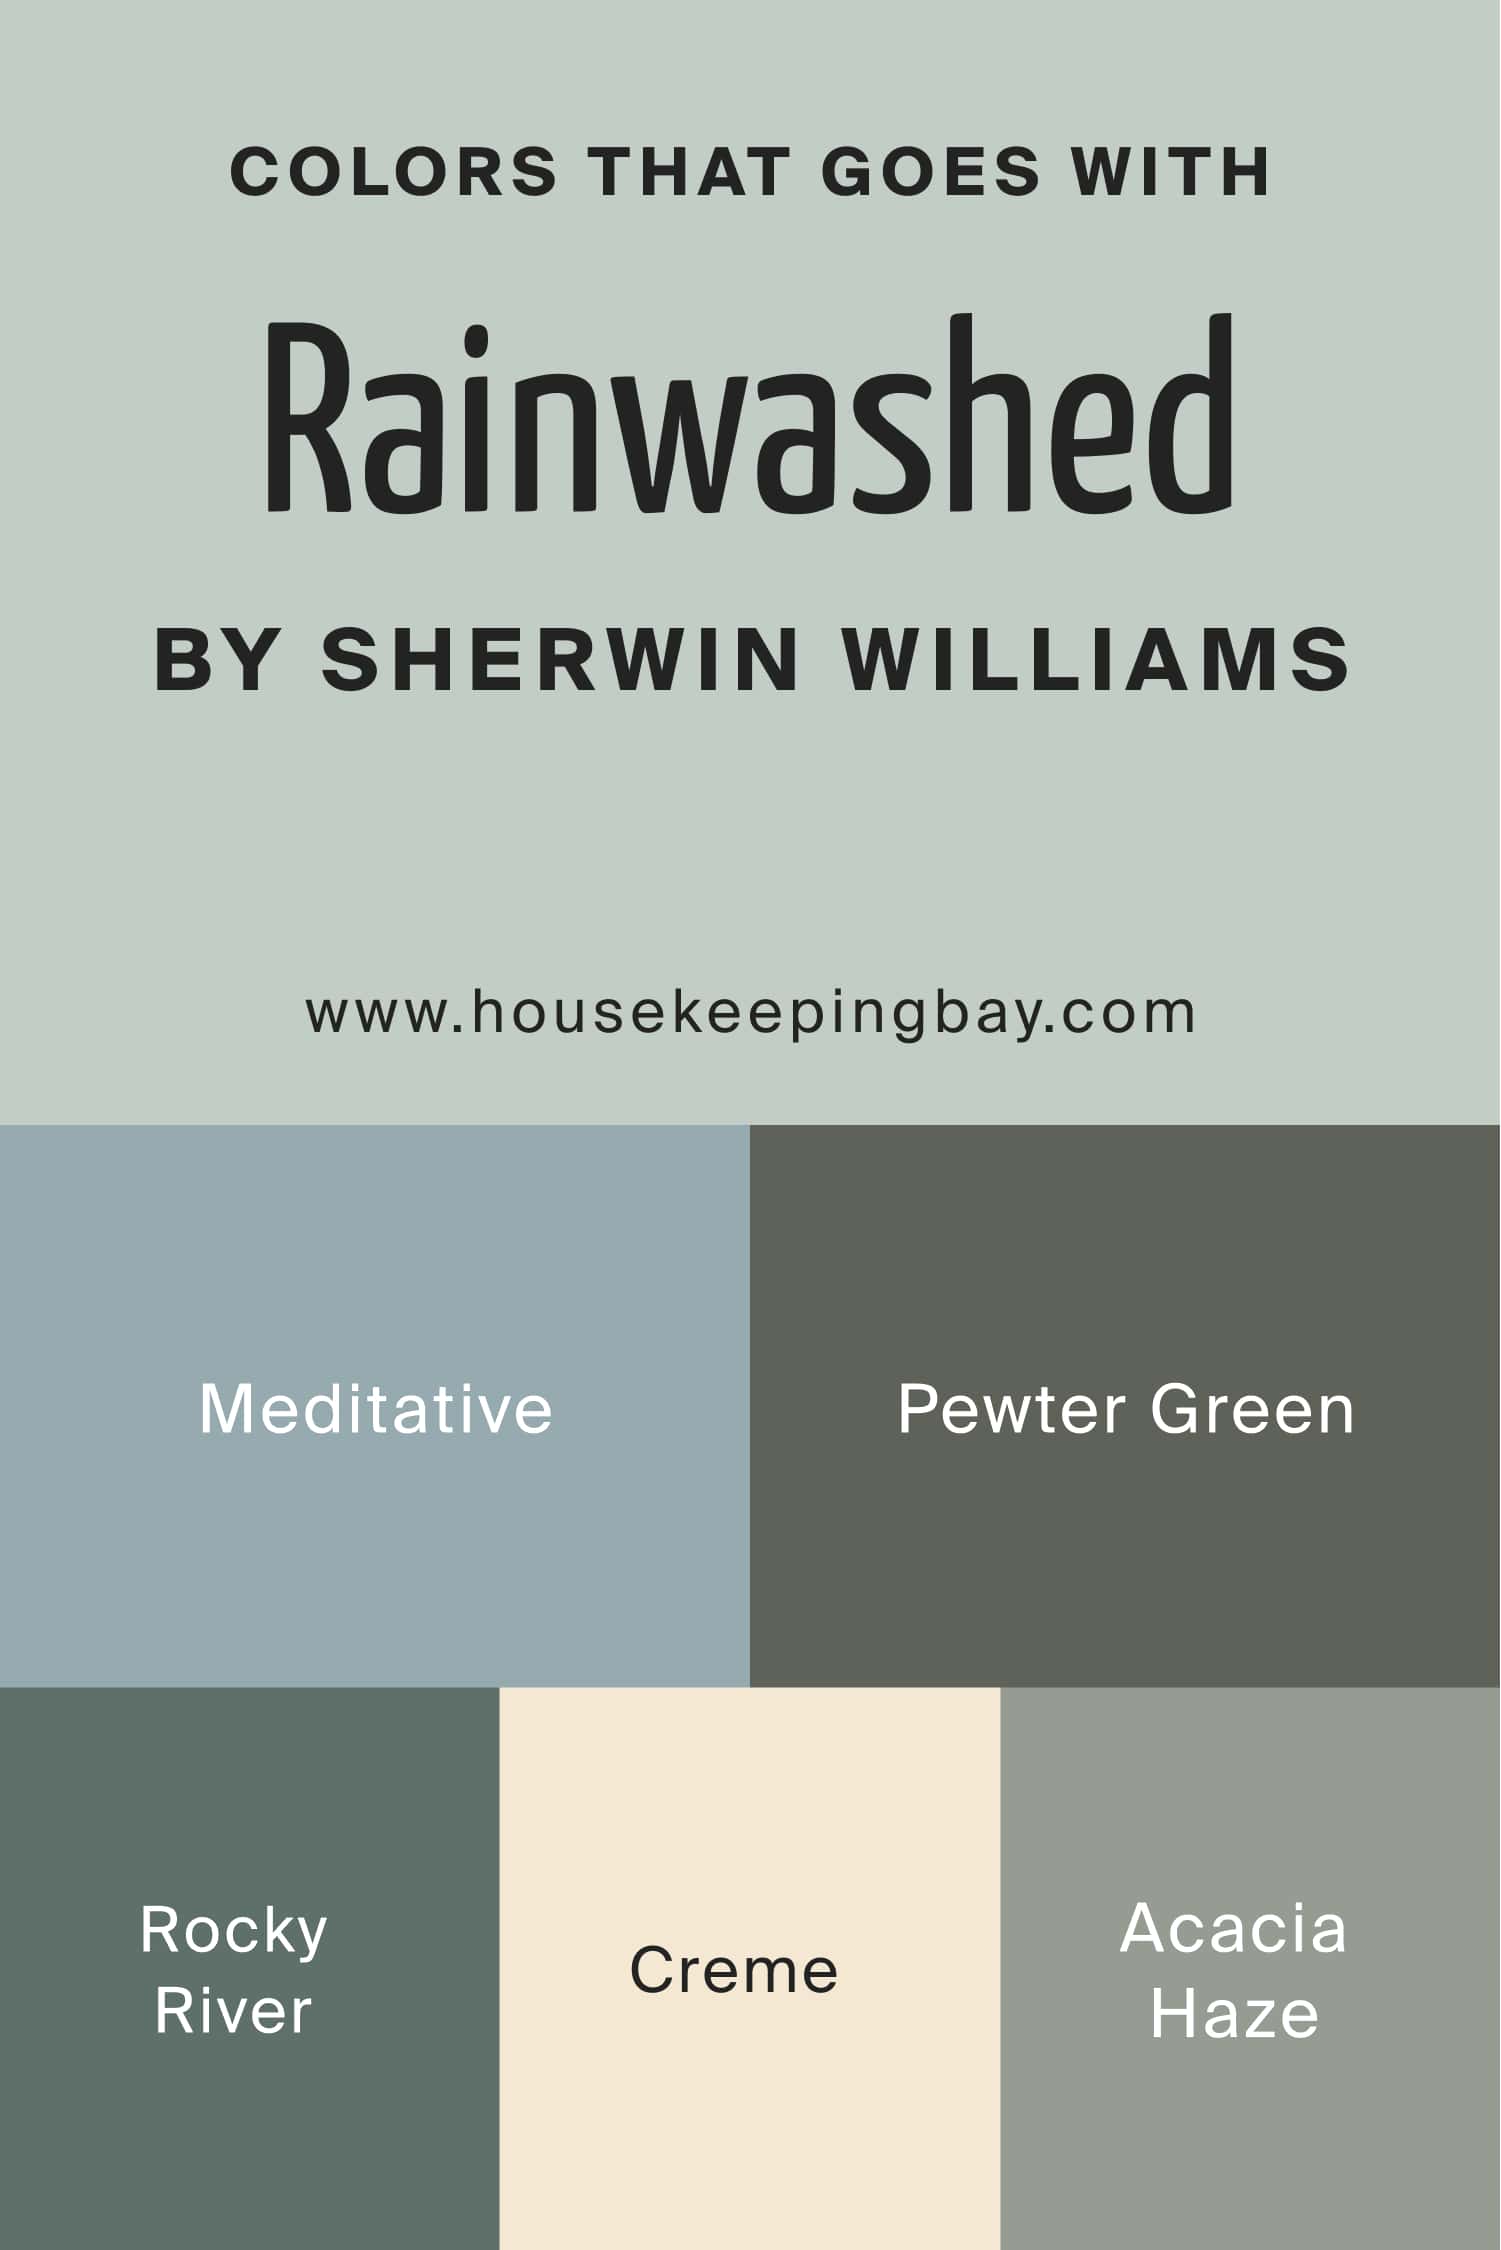 Colors that goes with Rainwashed by Sherwin Williams